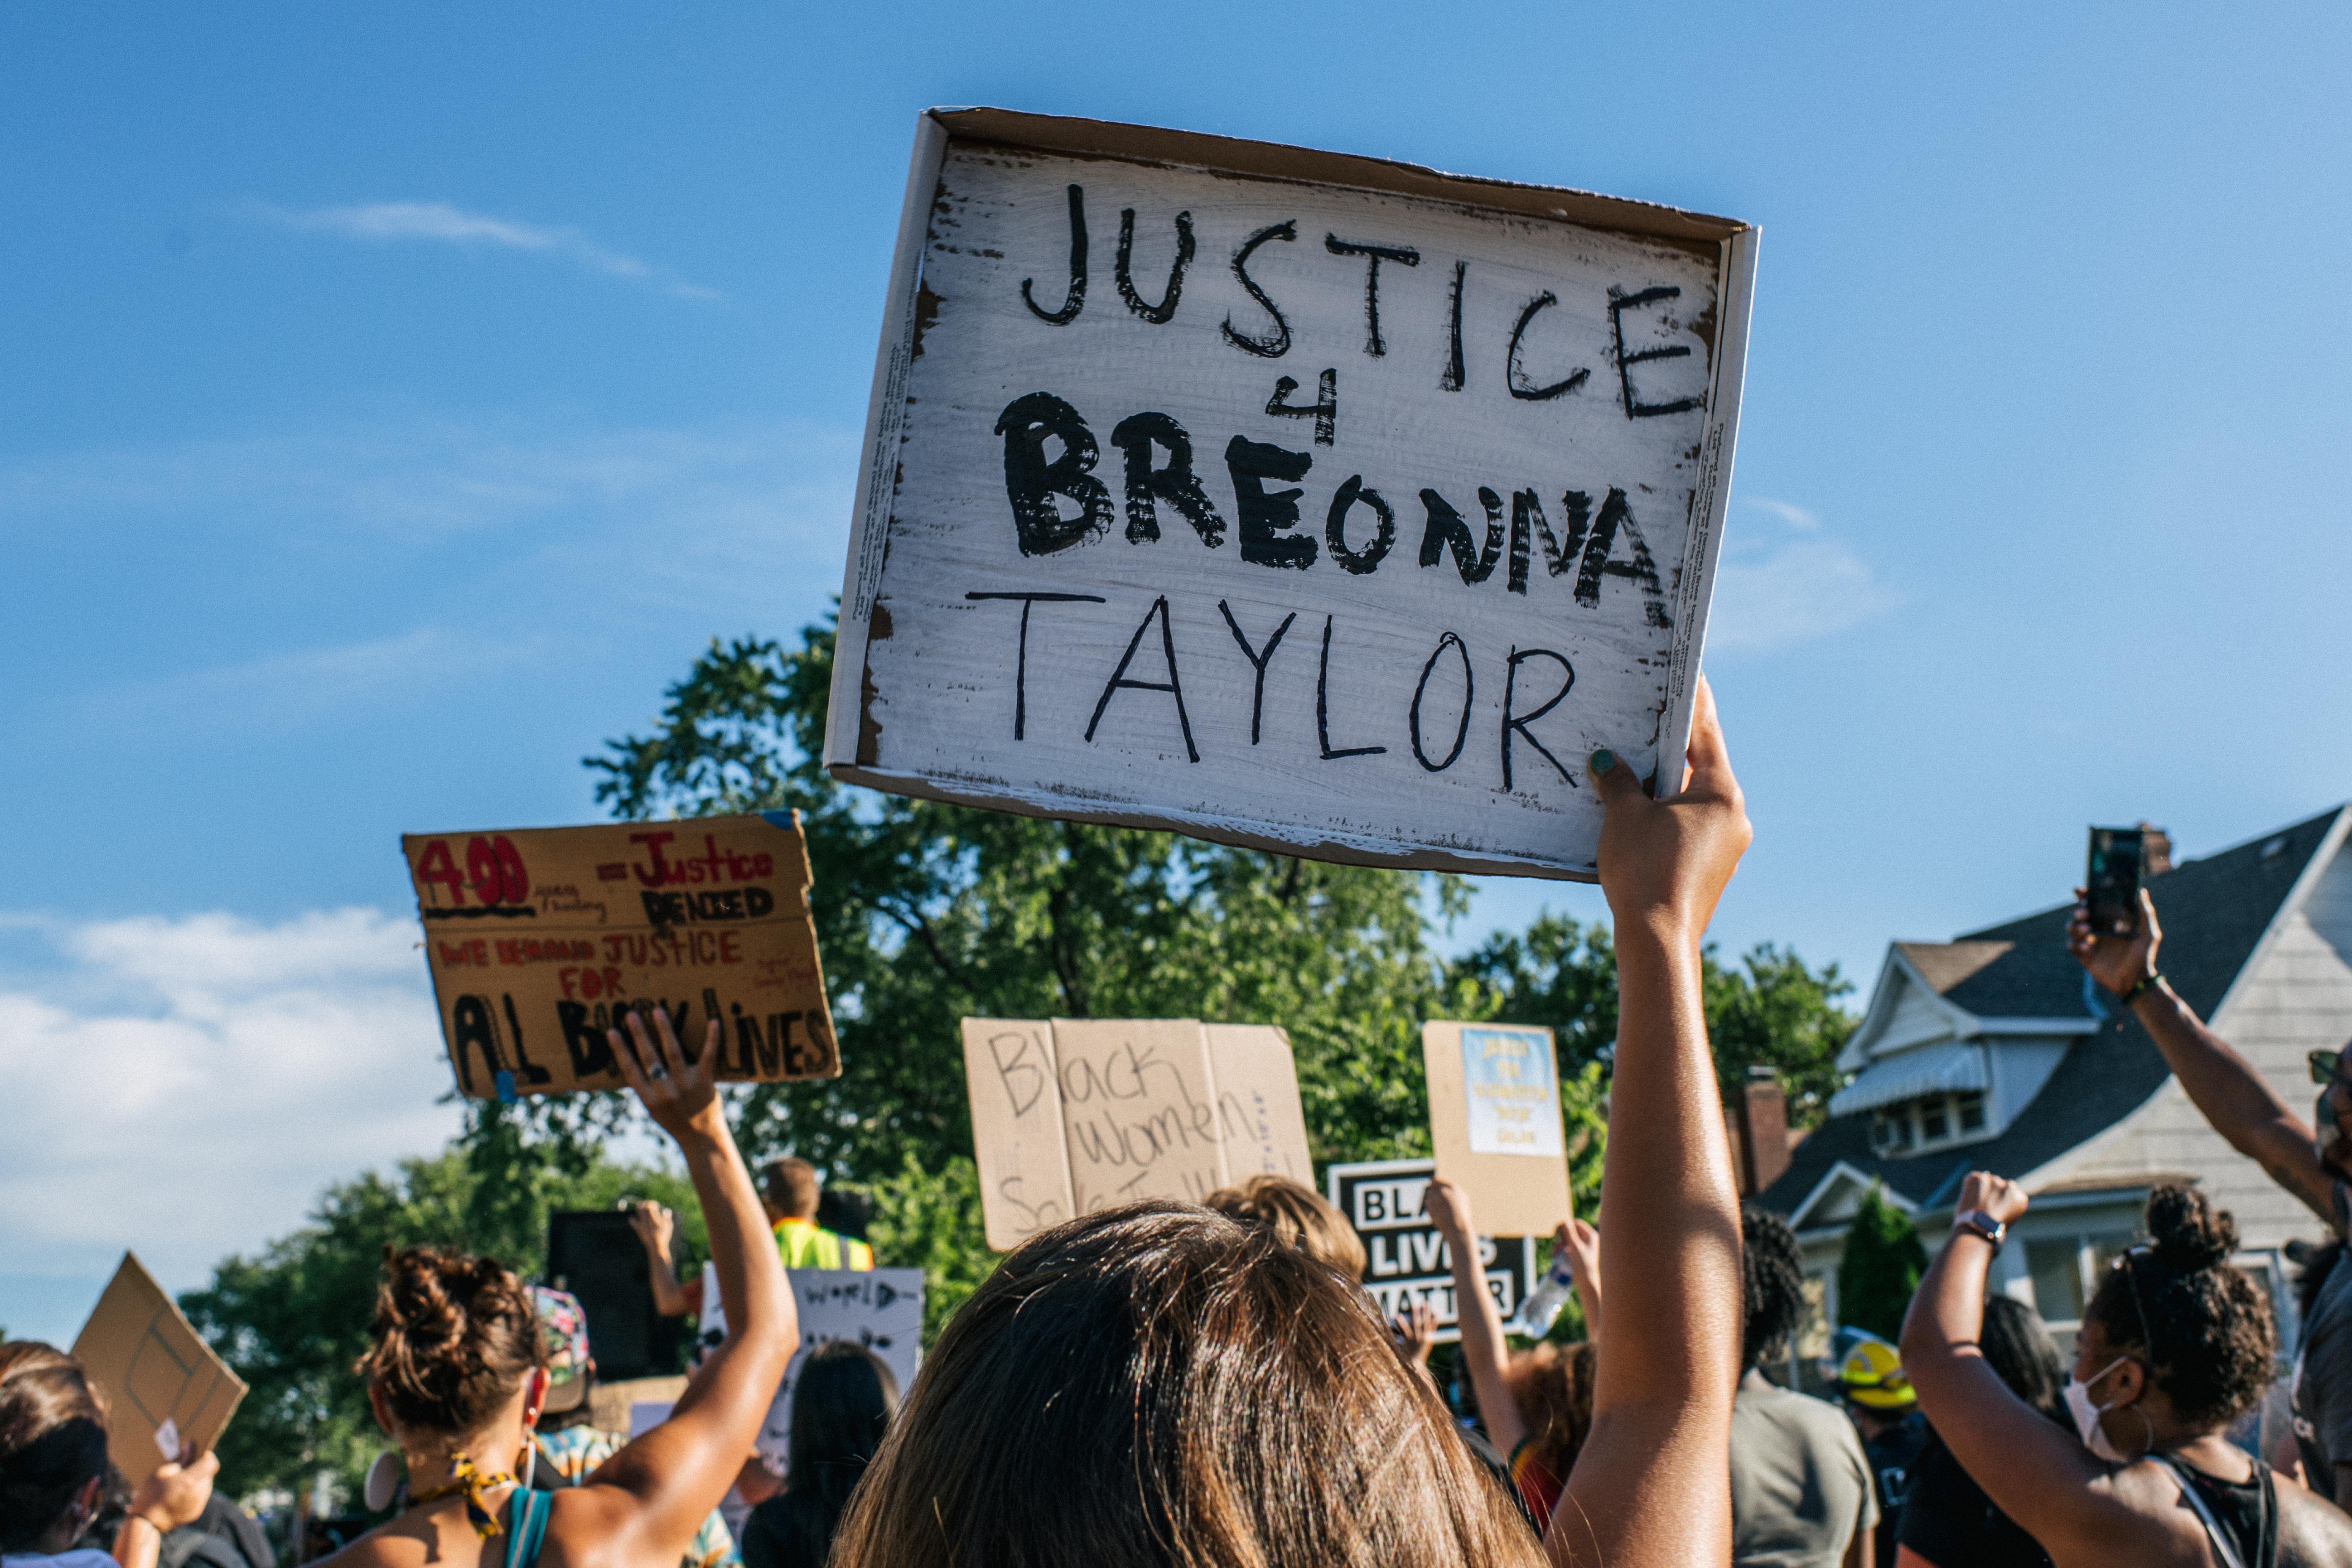 People march in a protest against police brutality and racism. One holds up a sign that reads "Justice 4 Breonna Taylor."